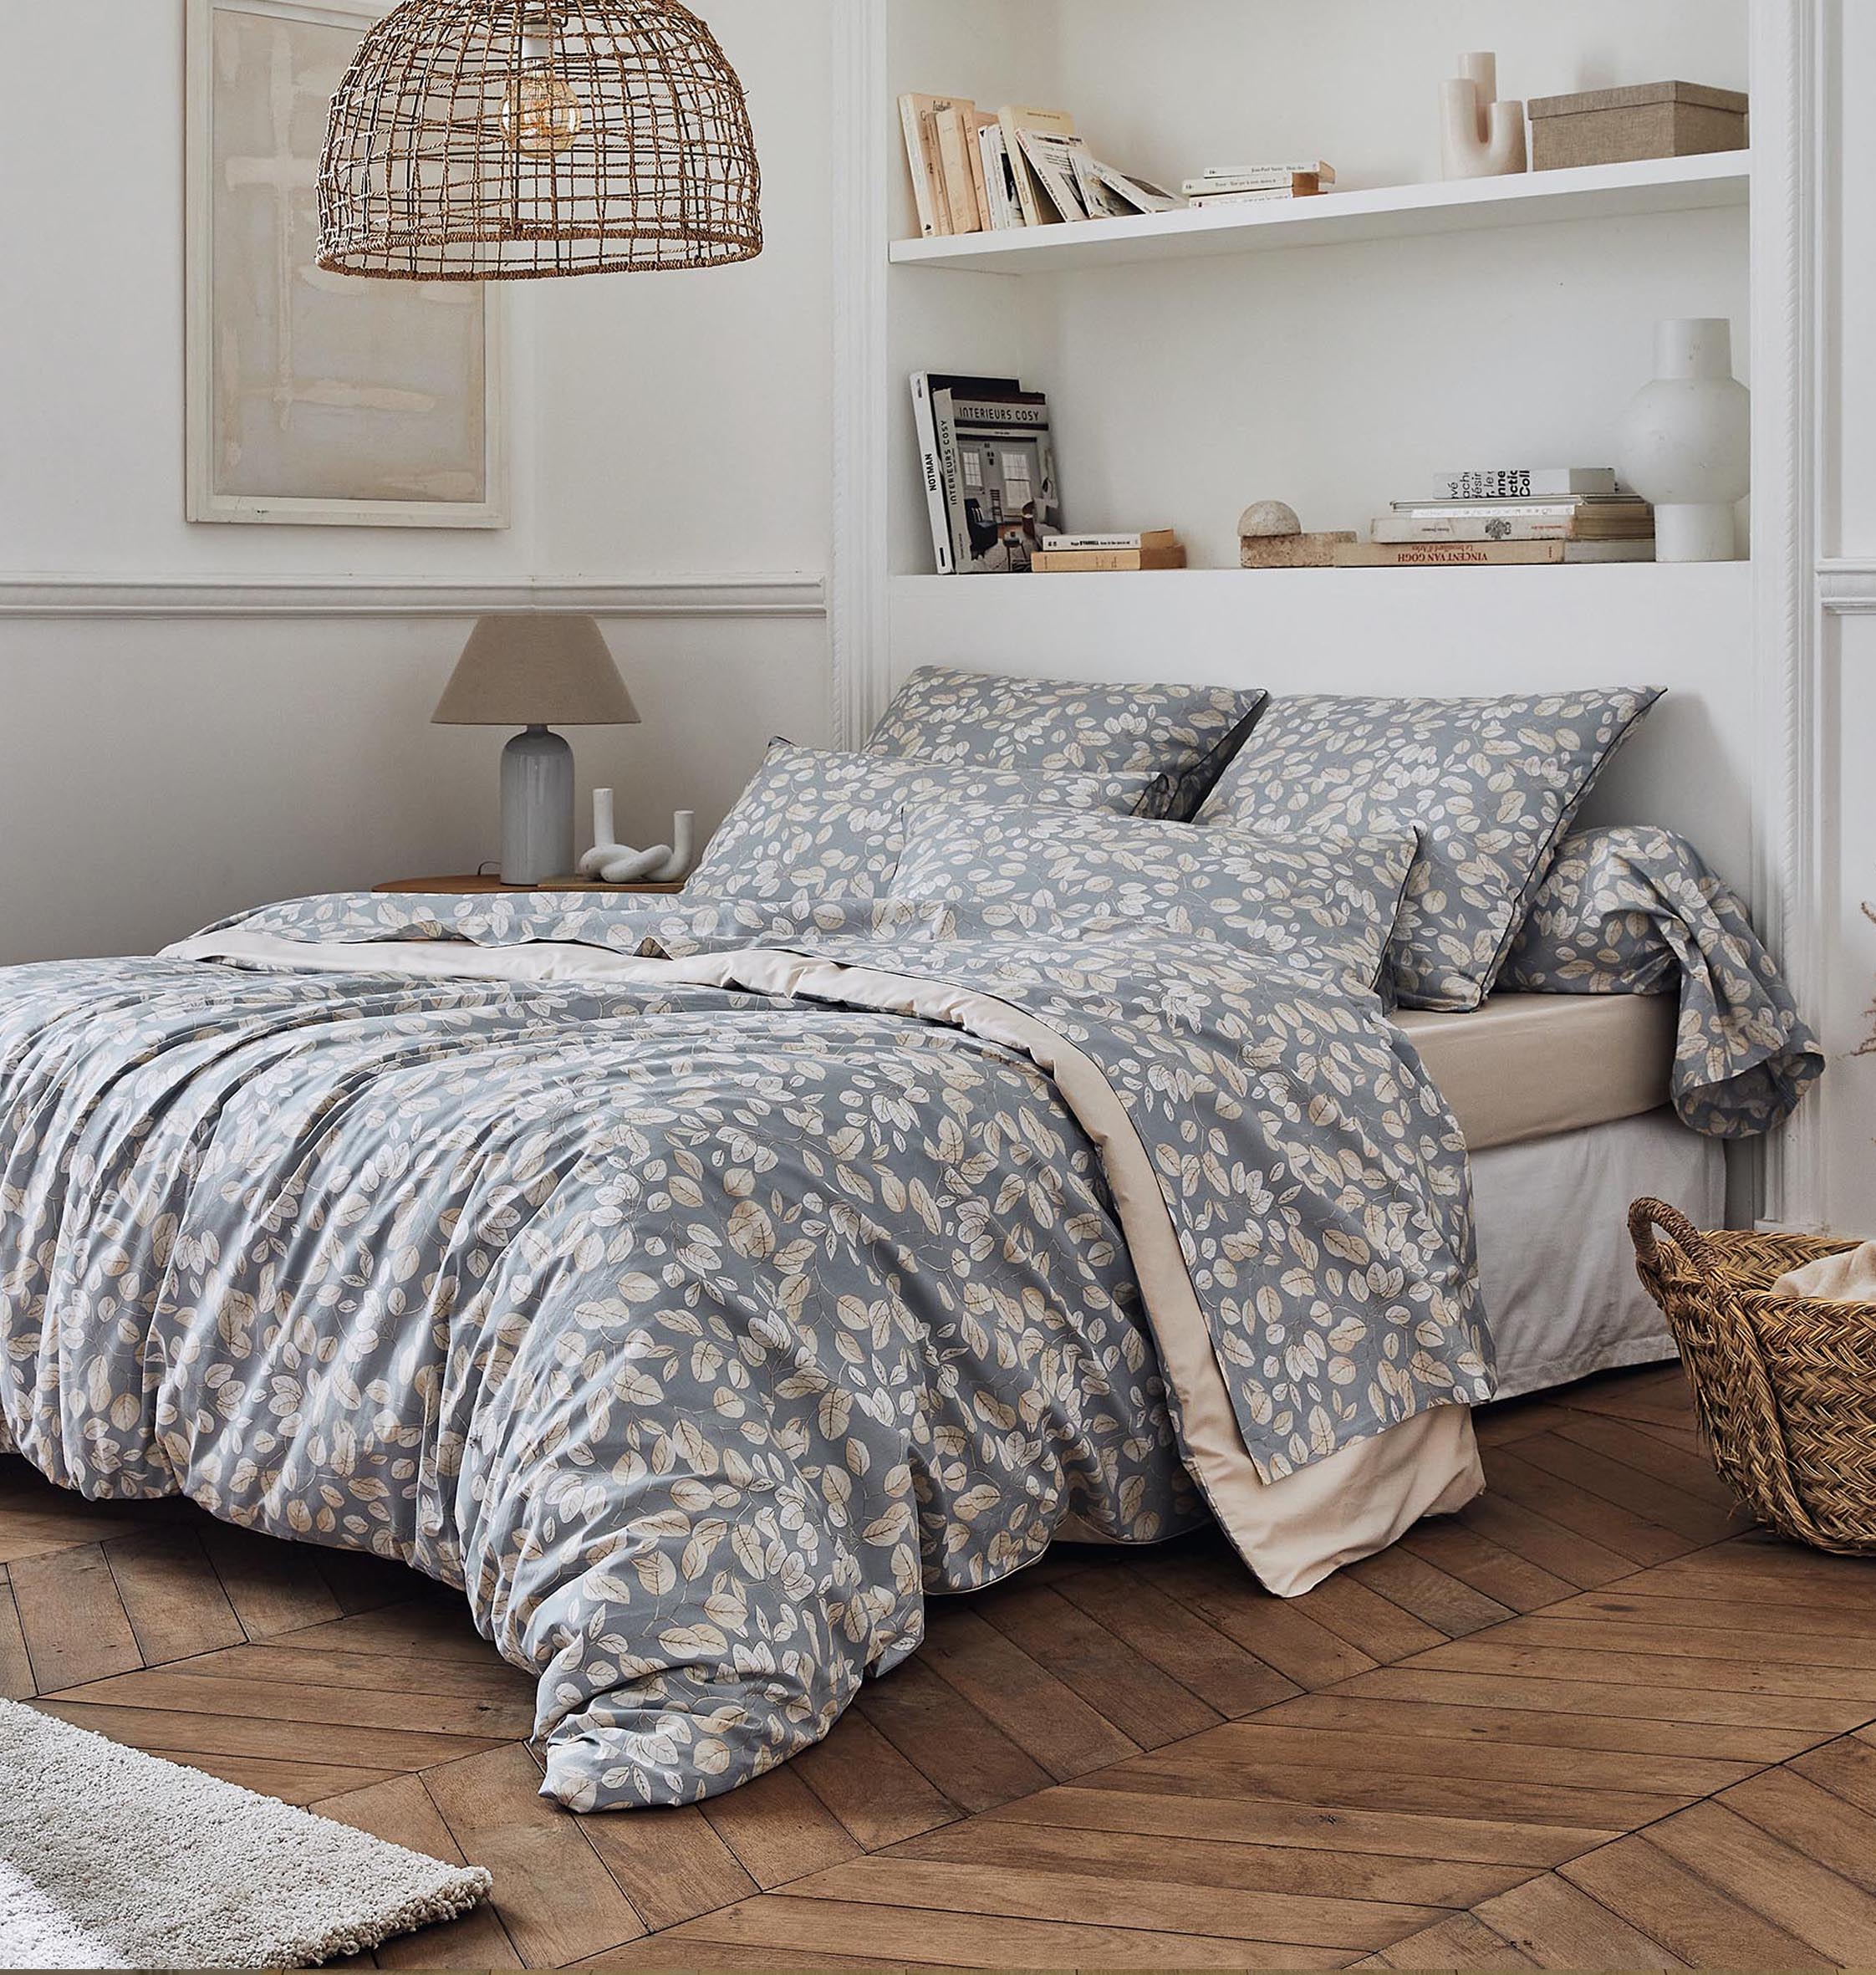 Cotton percale bed linen made in France by Tradilinge